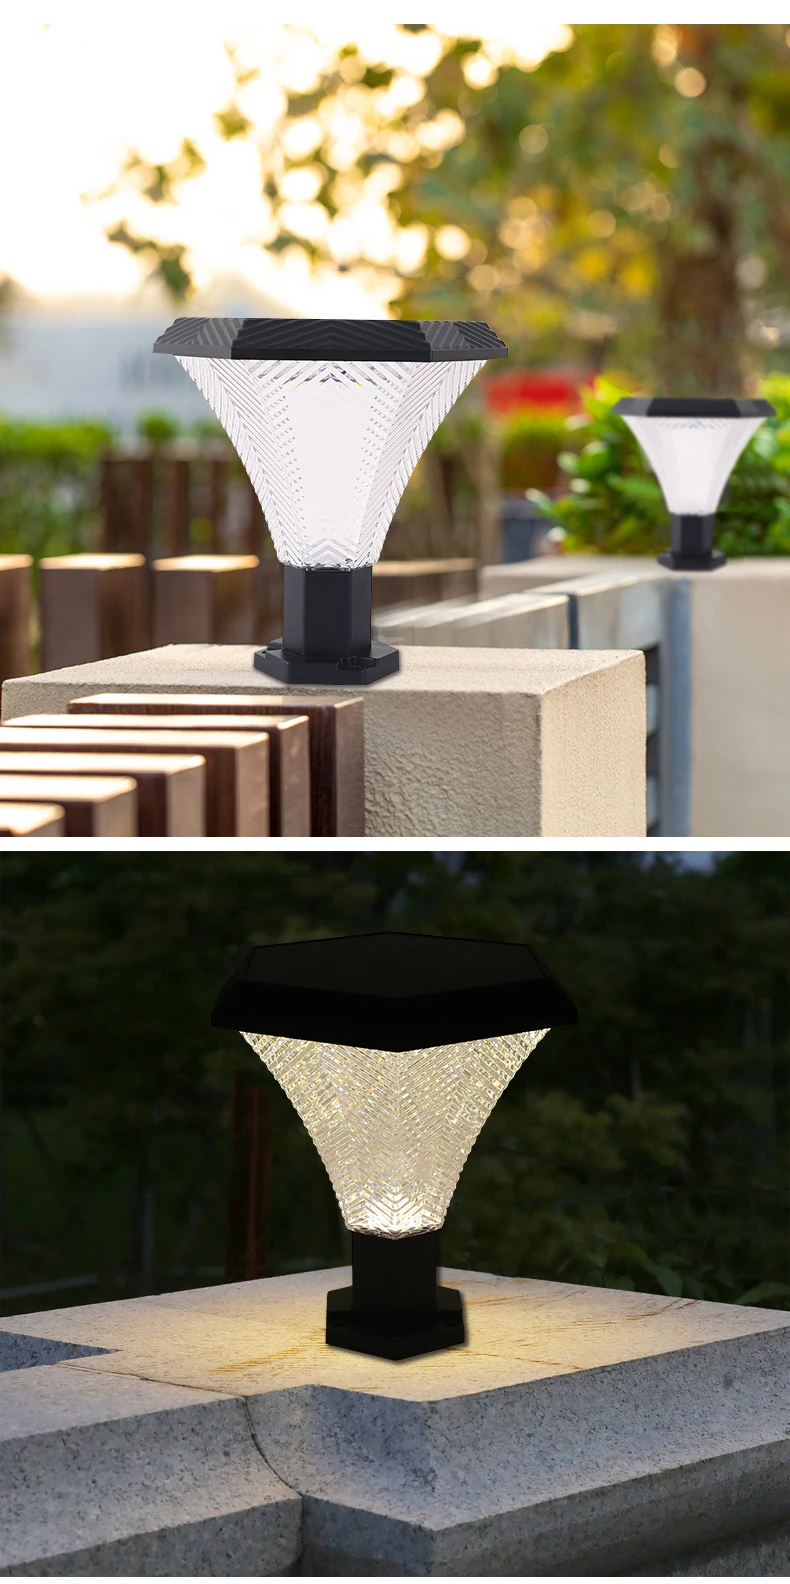 Good Quality And Price Of Best Solar Powered Lights Decoration Garden Light Beam